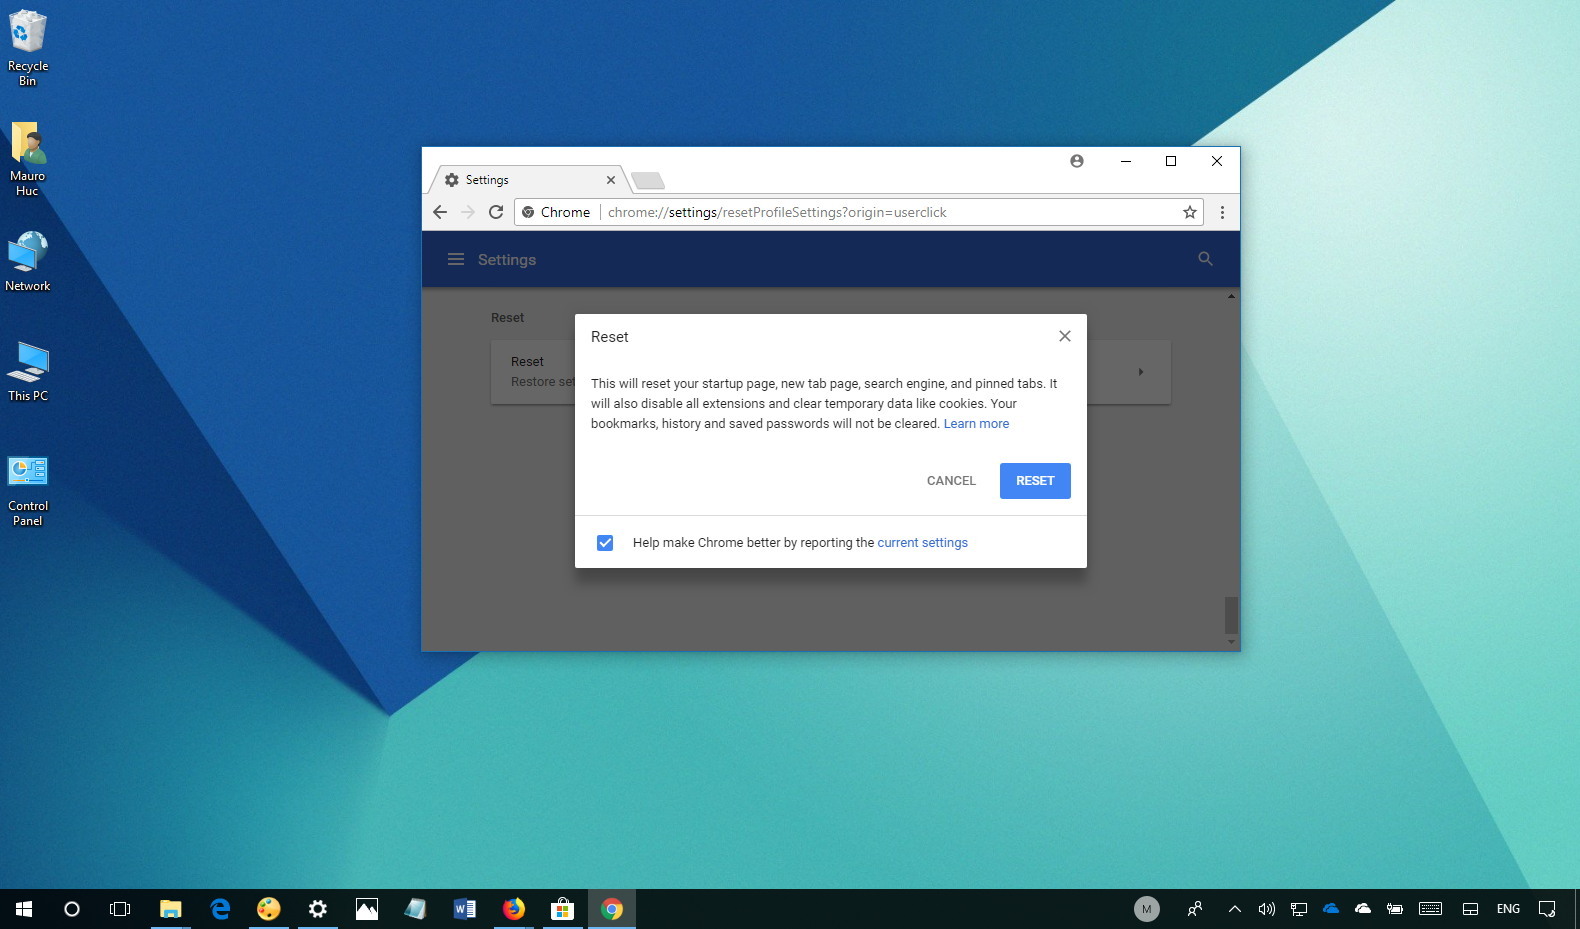 Update Chrome: Keep your Chrome browser up to date to benefit from the latest bug fixes and improvements
Reset Chrome settings: Reset Chrome to its default settings to resolve any underlying issues